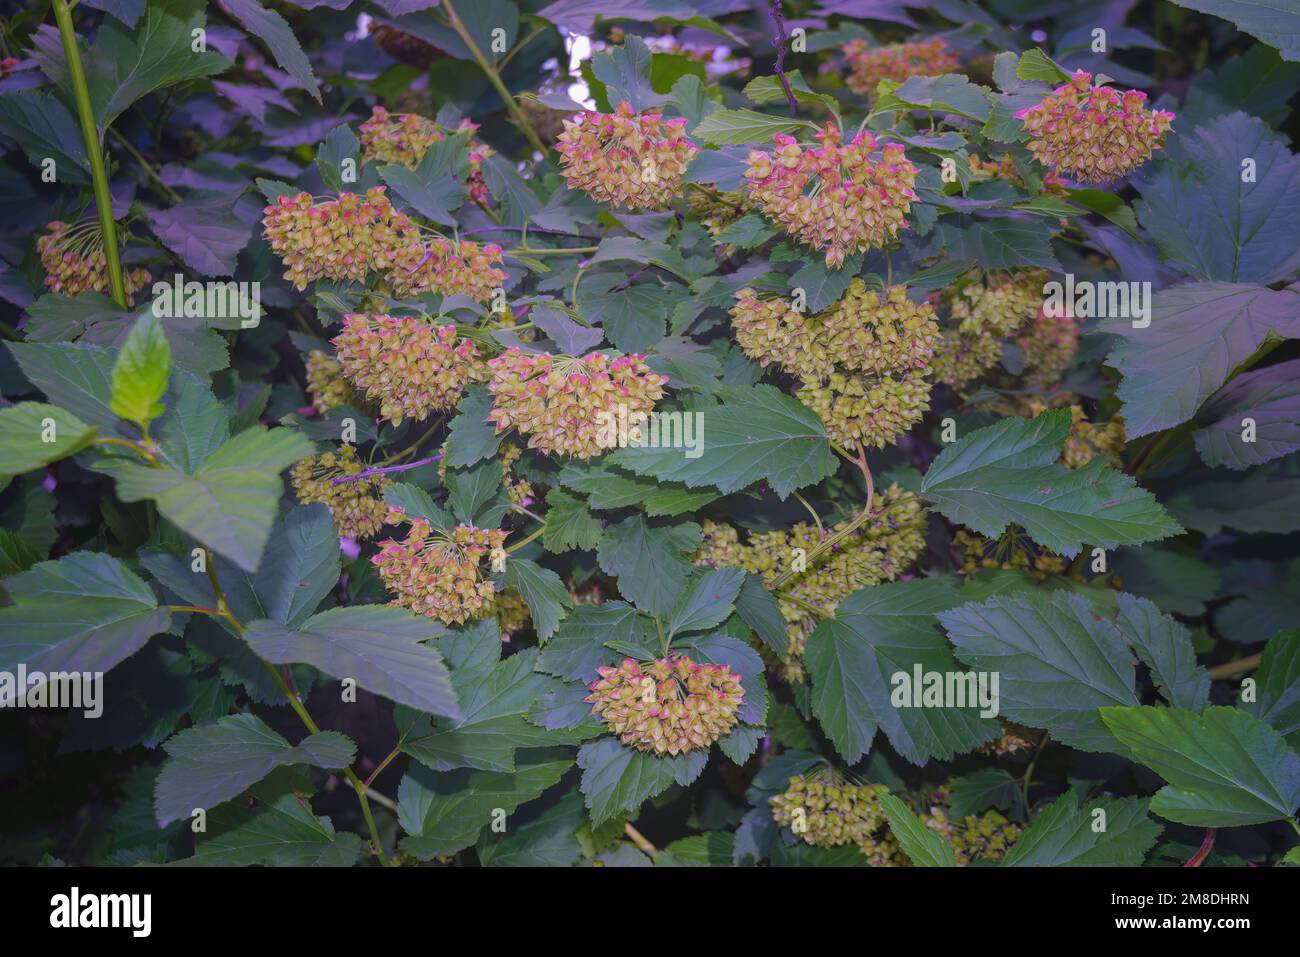 Scientific name Dombeya wallichii and common names pinkball, pink ball tree, or tropical hydrangea blossom plants in the park close-up. Stock Photo